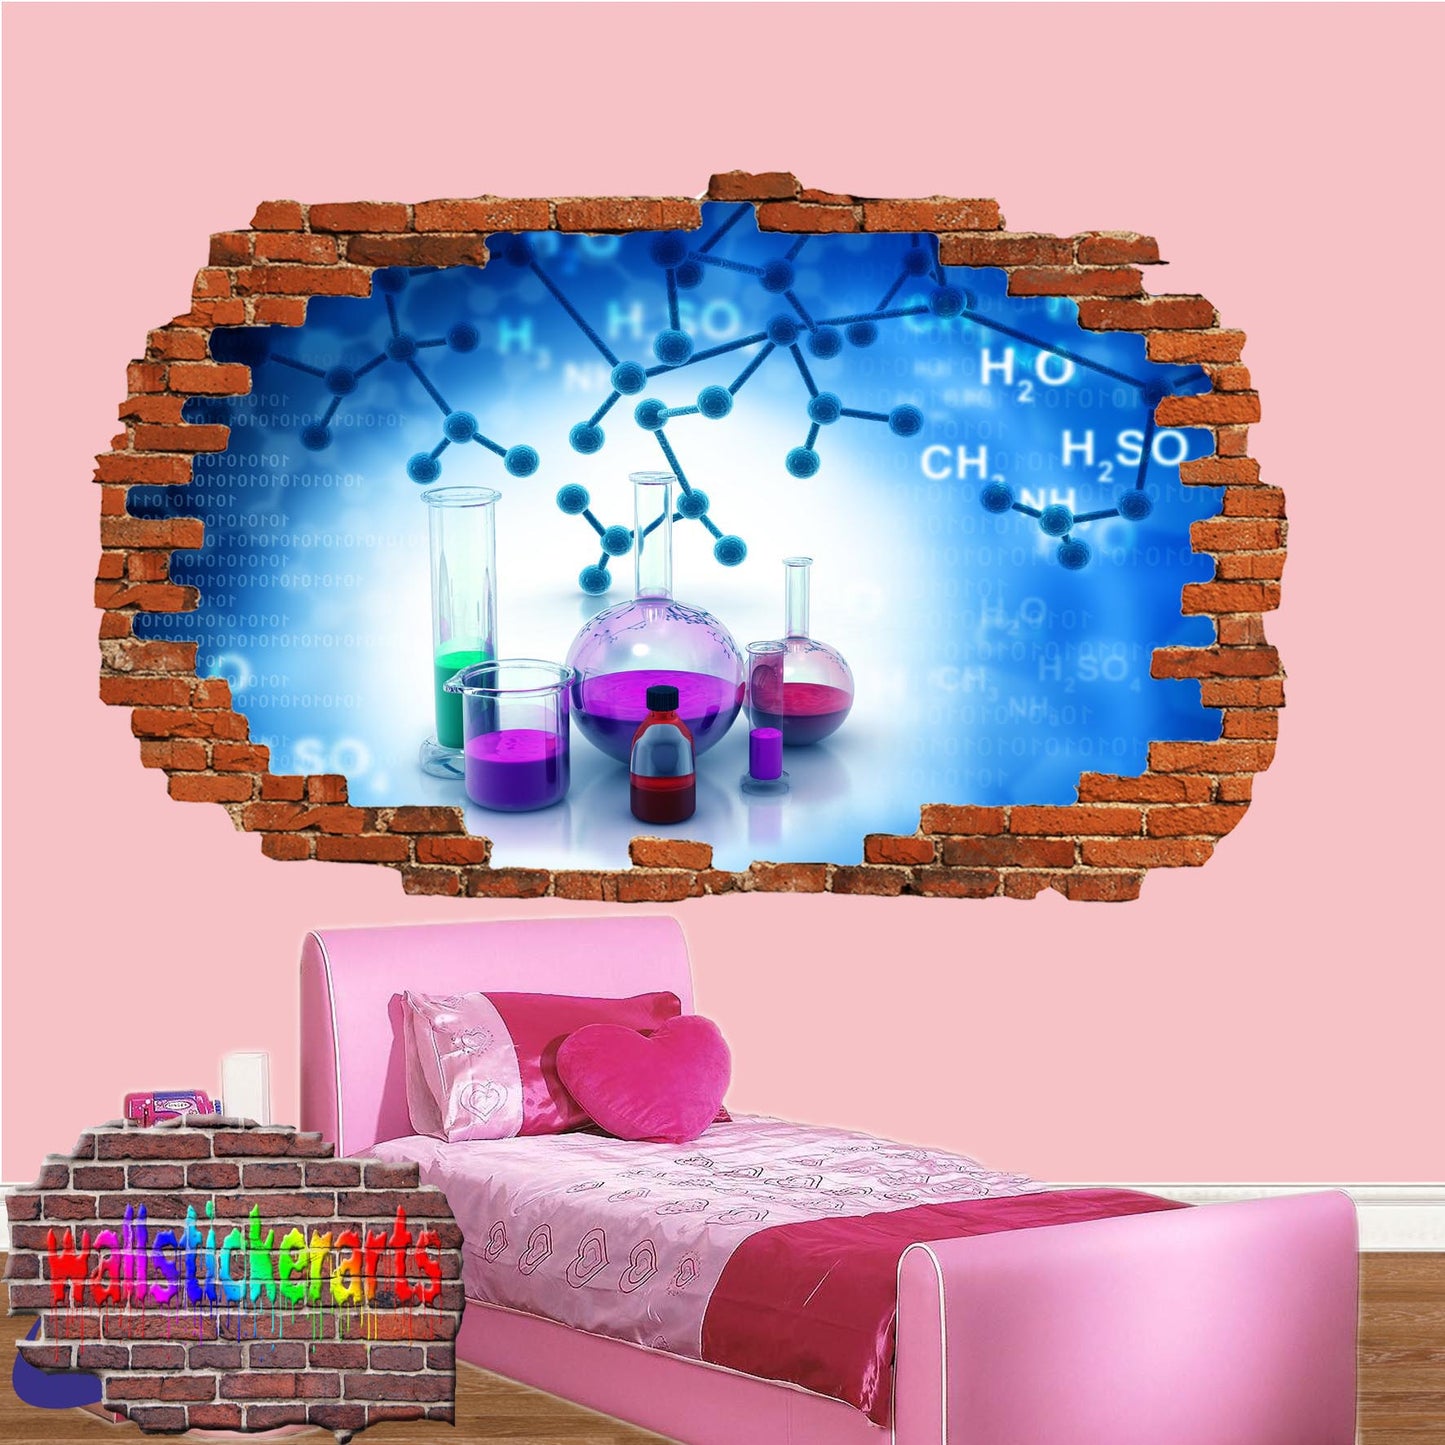 Chemistry Lab Molecules 3d Art Smashed Effect Wall Sticker Room Office Nursery Shop Decoration Decal Mural XW0